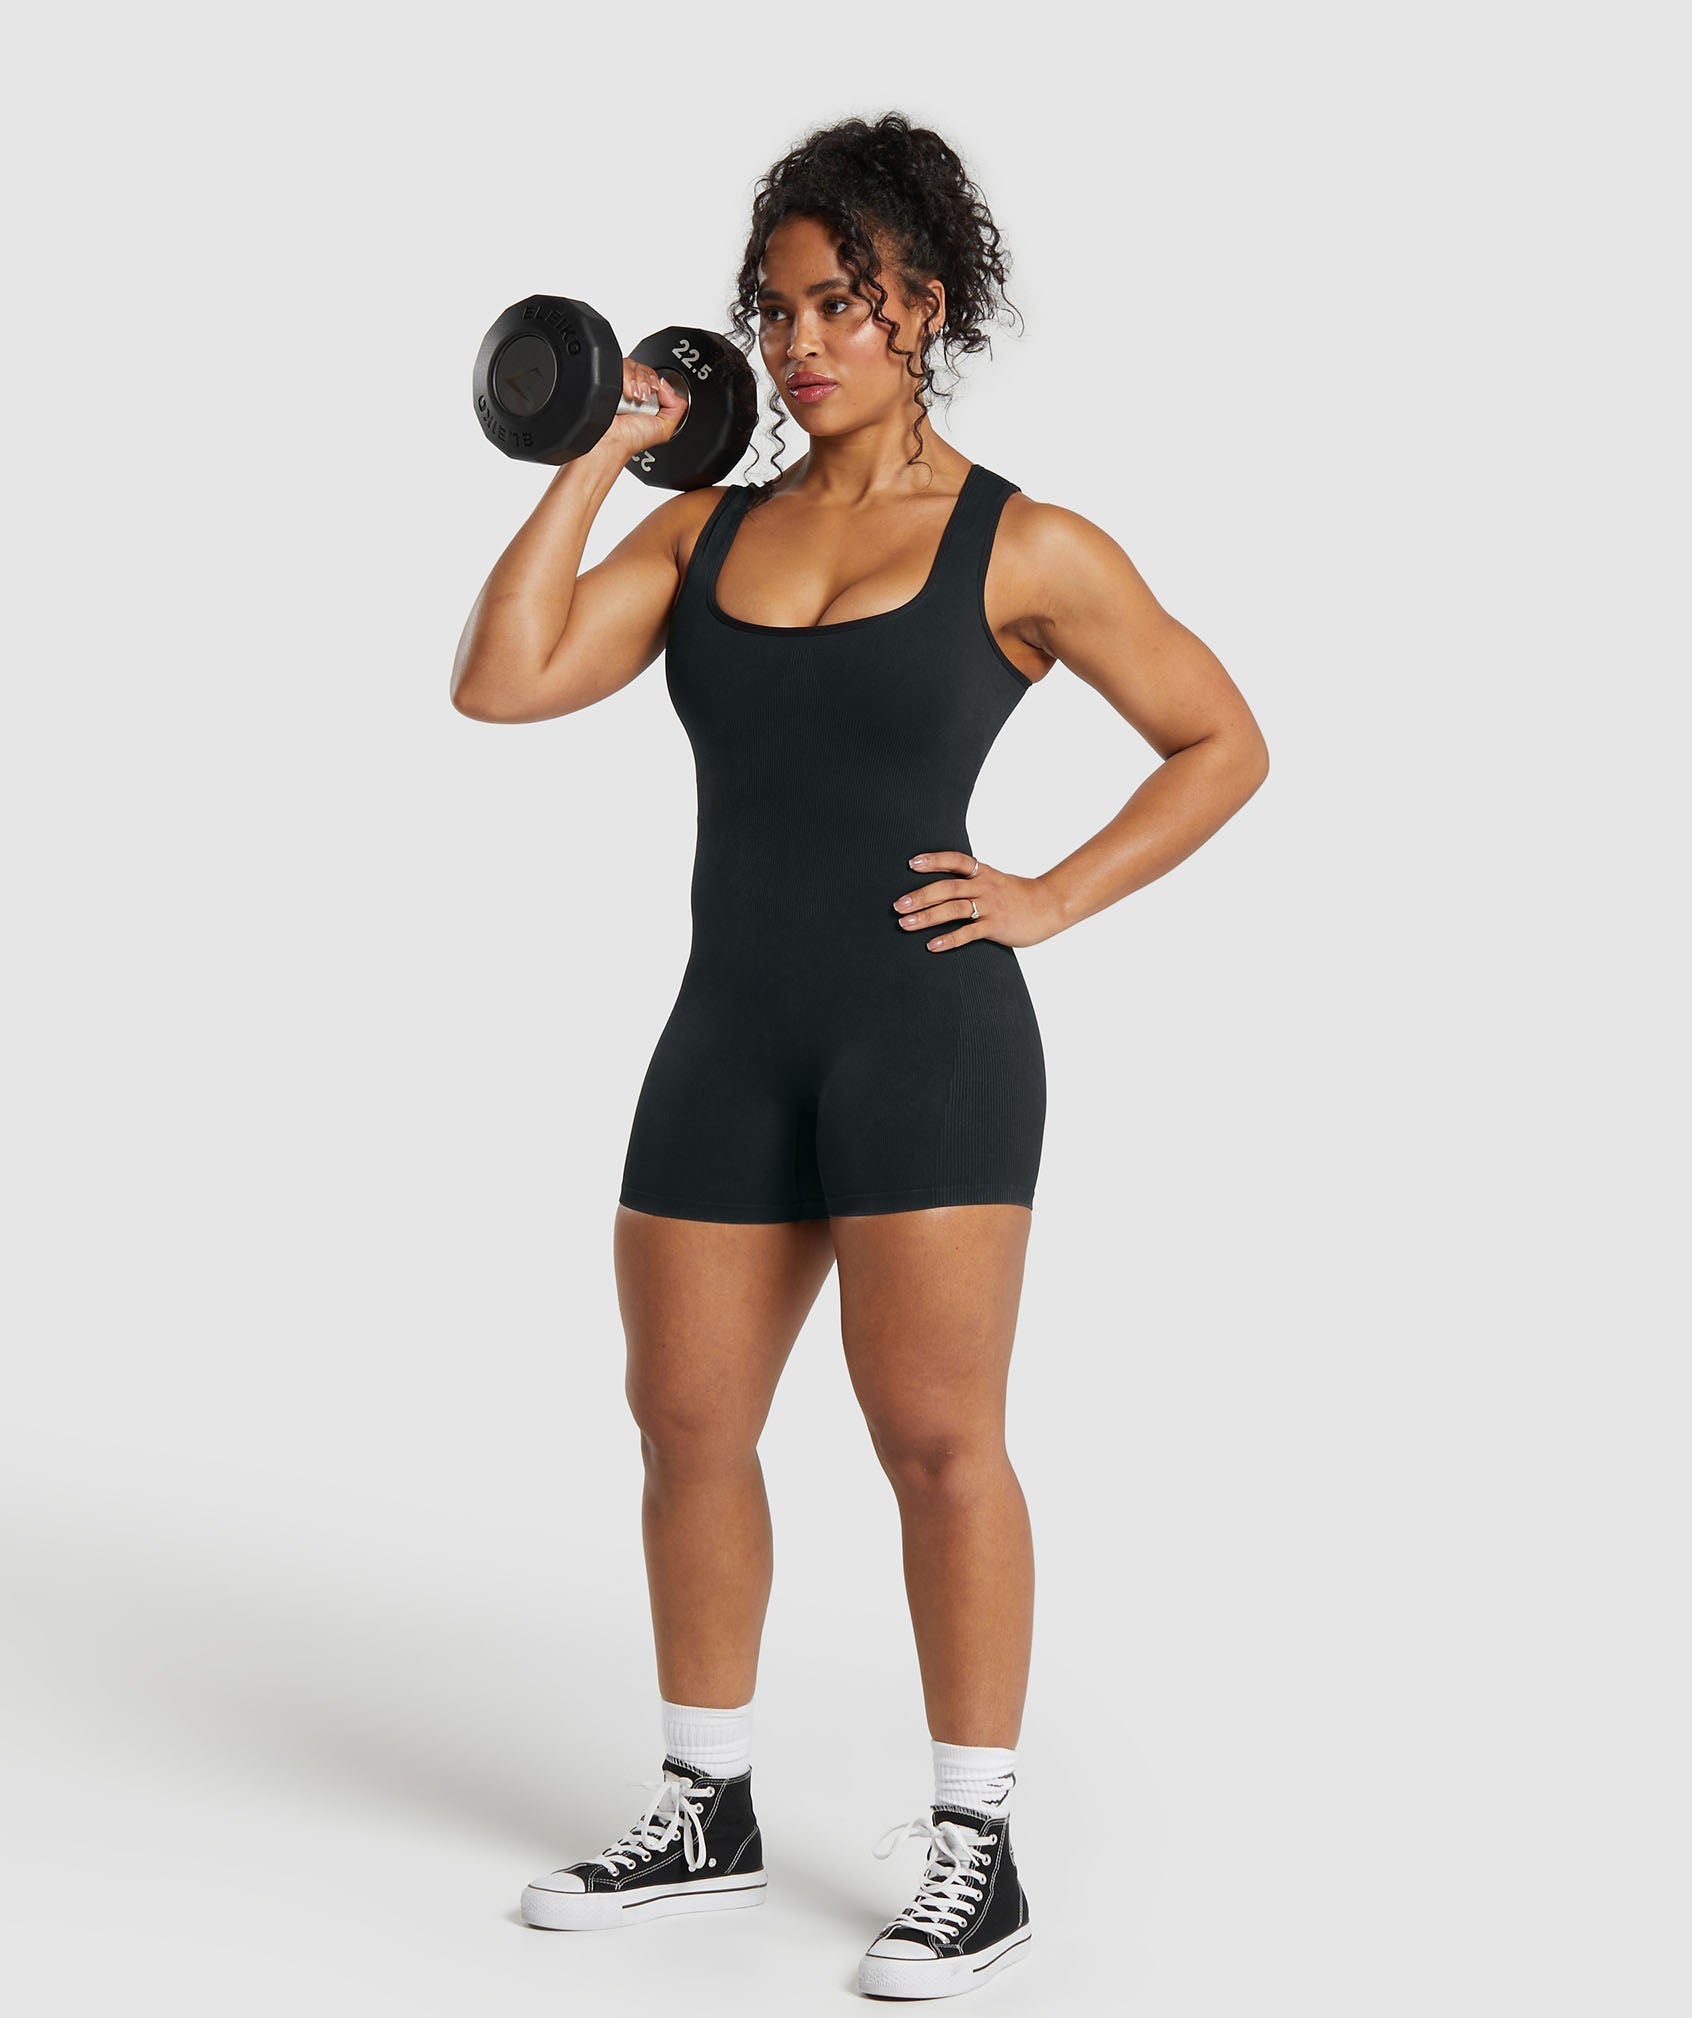 Gains Seamless All-In-One in Black - view 4